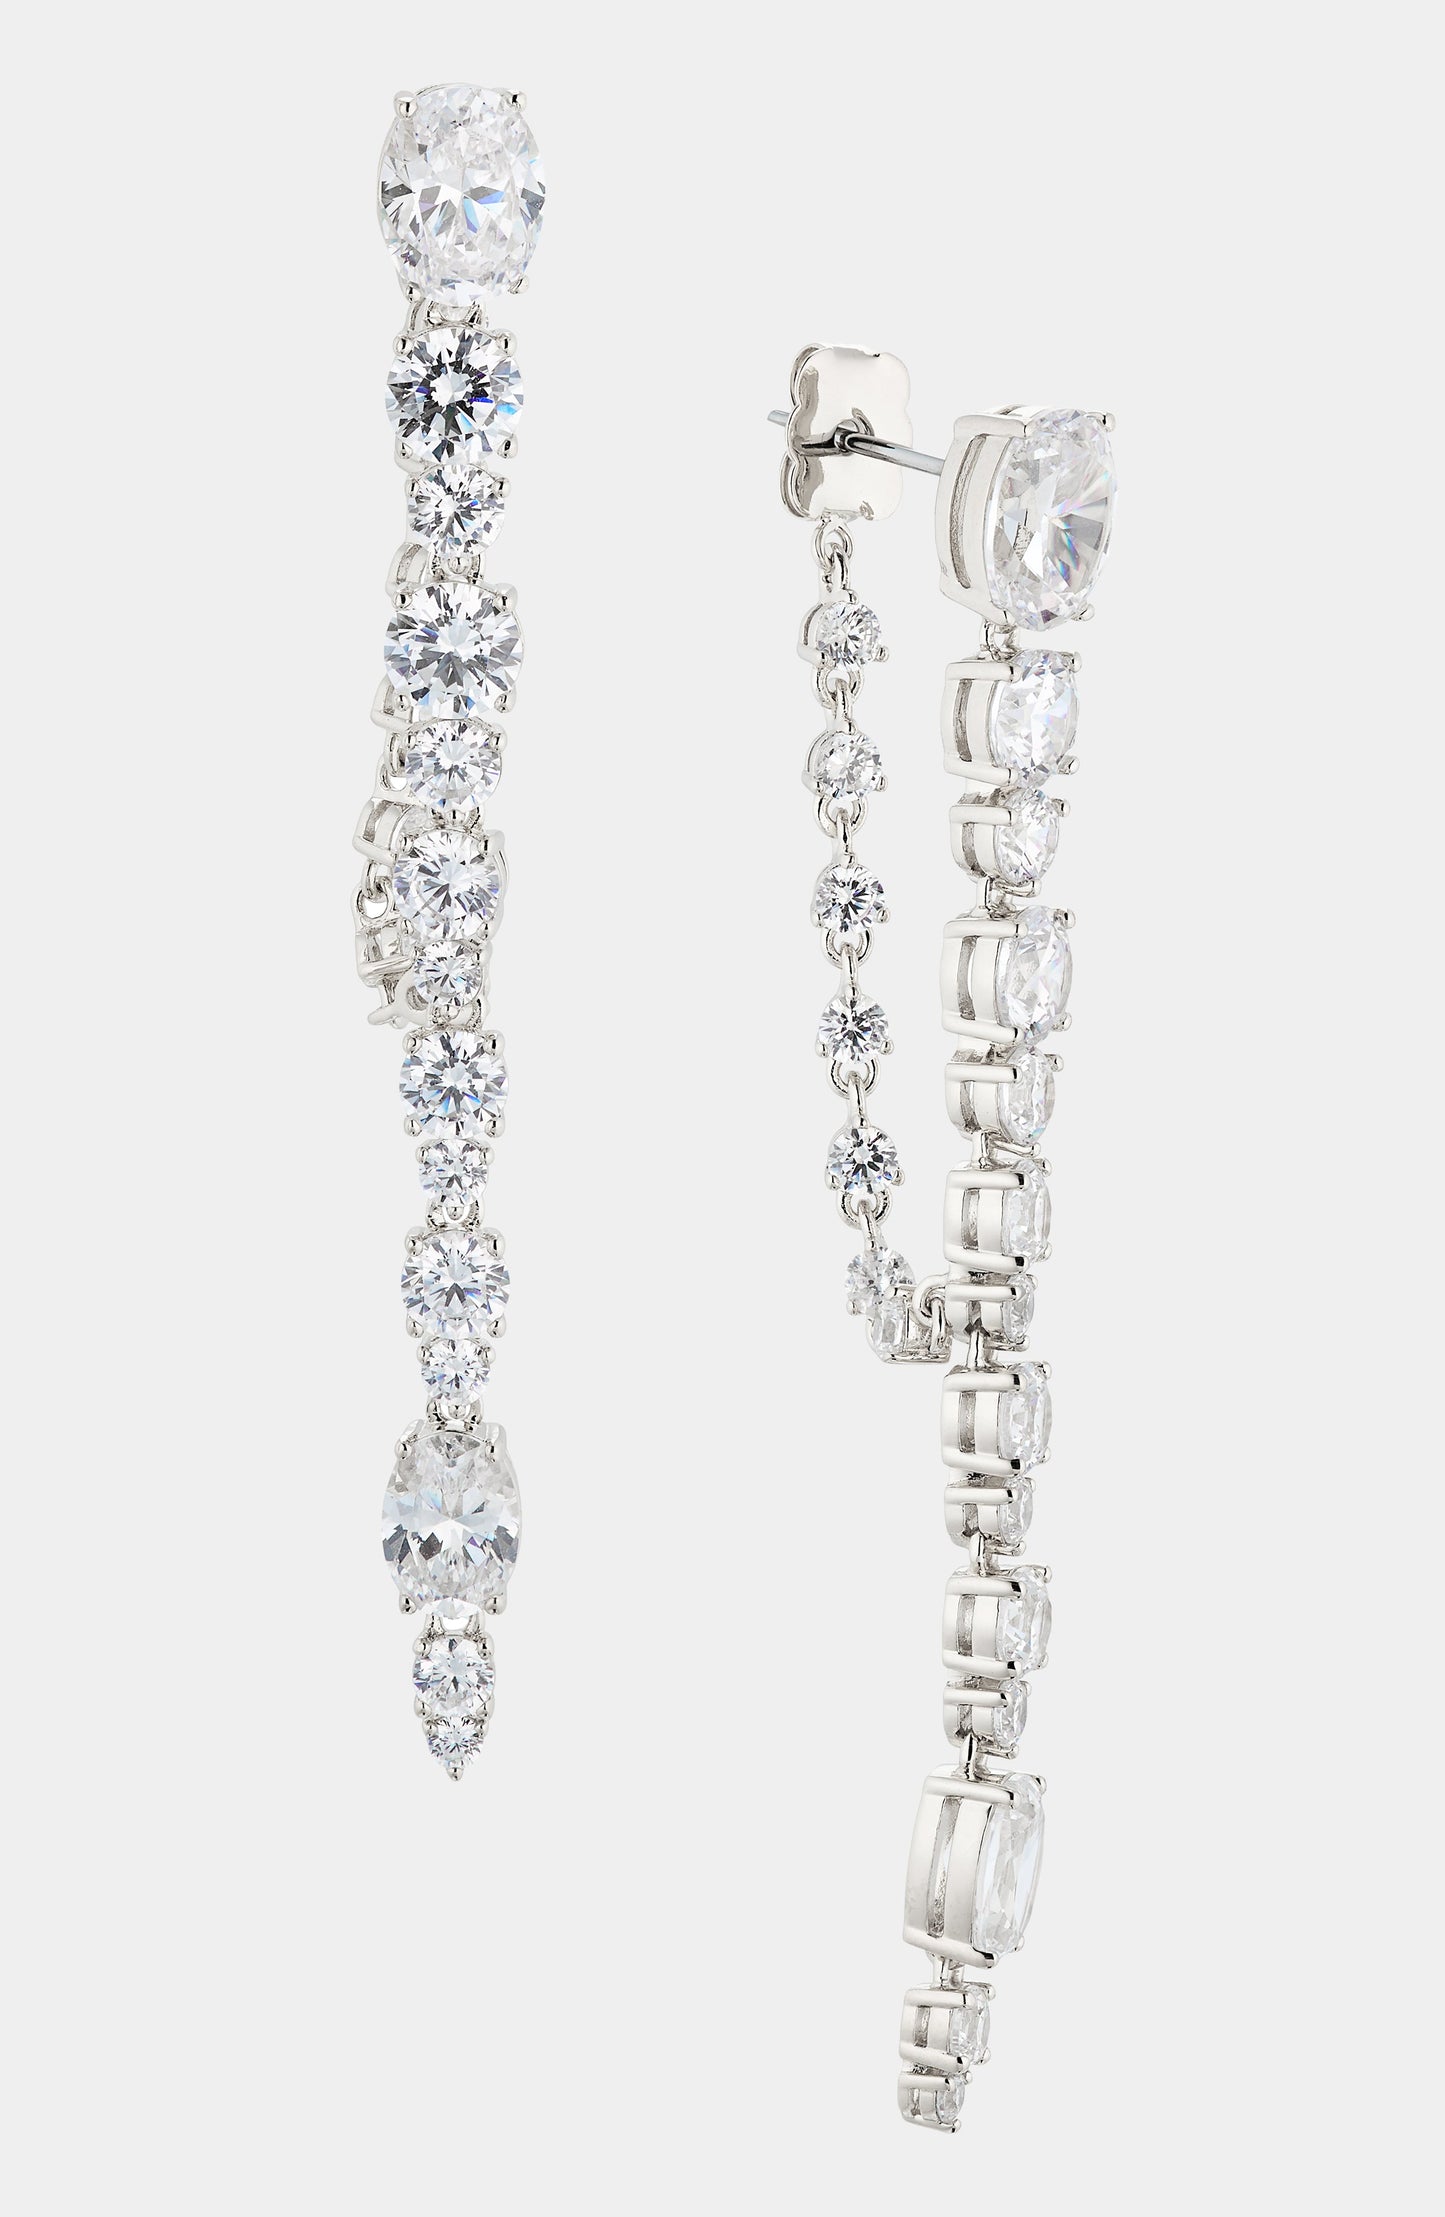 MATCHPOINT LINKED CZ EARRINGS